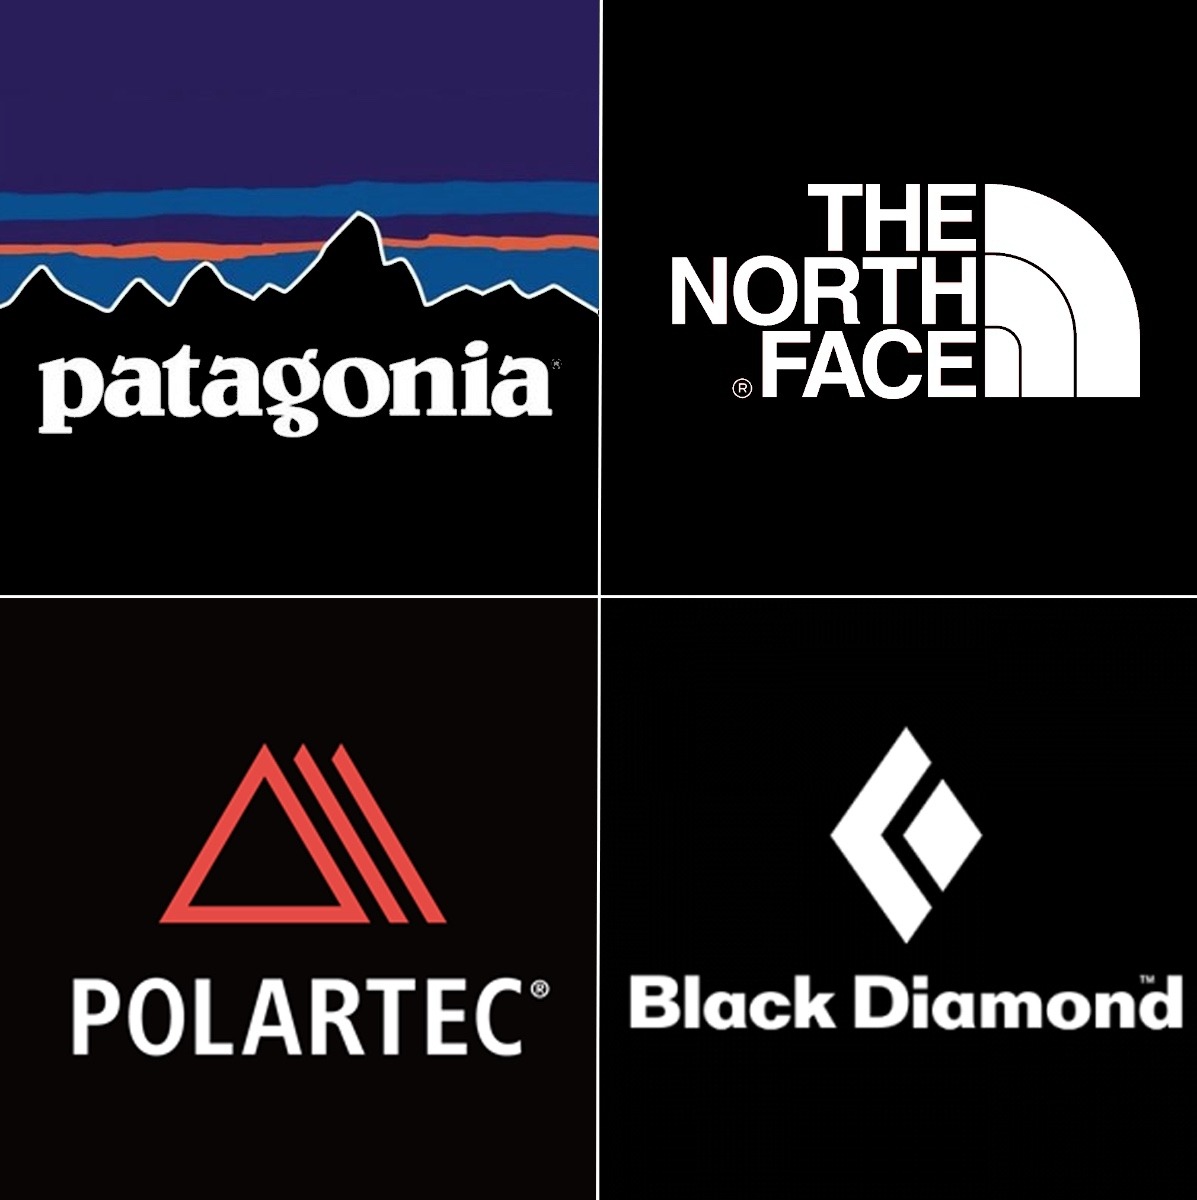 These four powerhouse manufacturers of outdoor clothing and products led a boycott of the Outdoor Retailer Show in Salt Lake City. And they supported the decision to move the lucrative event to Denver this year.